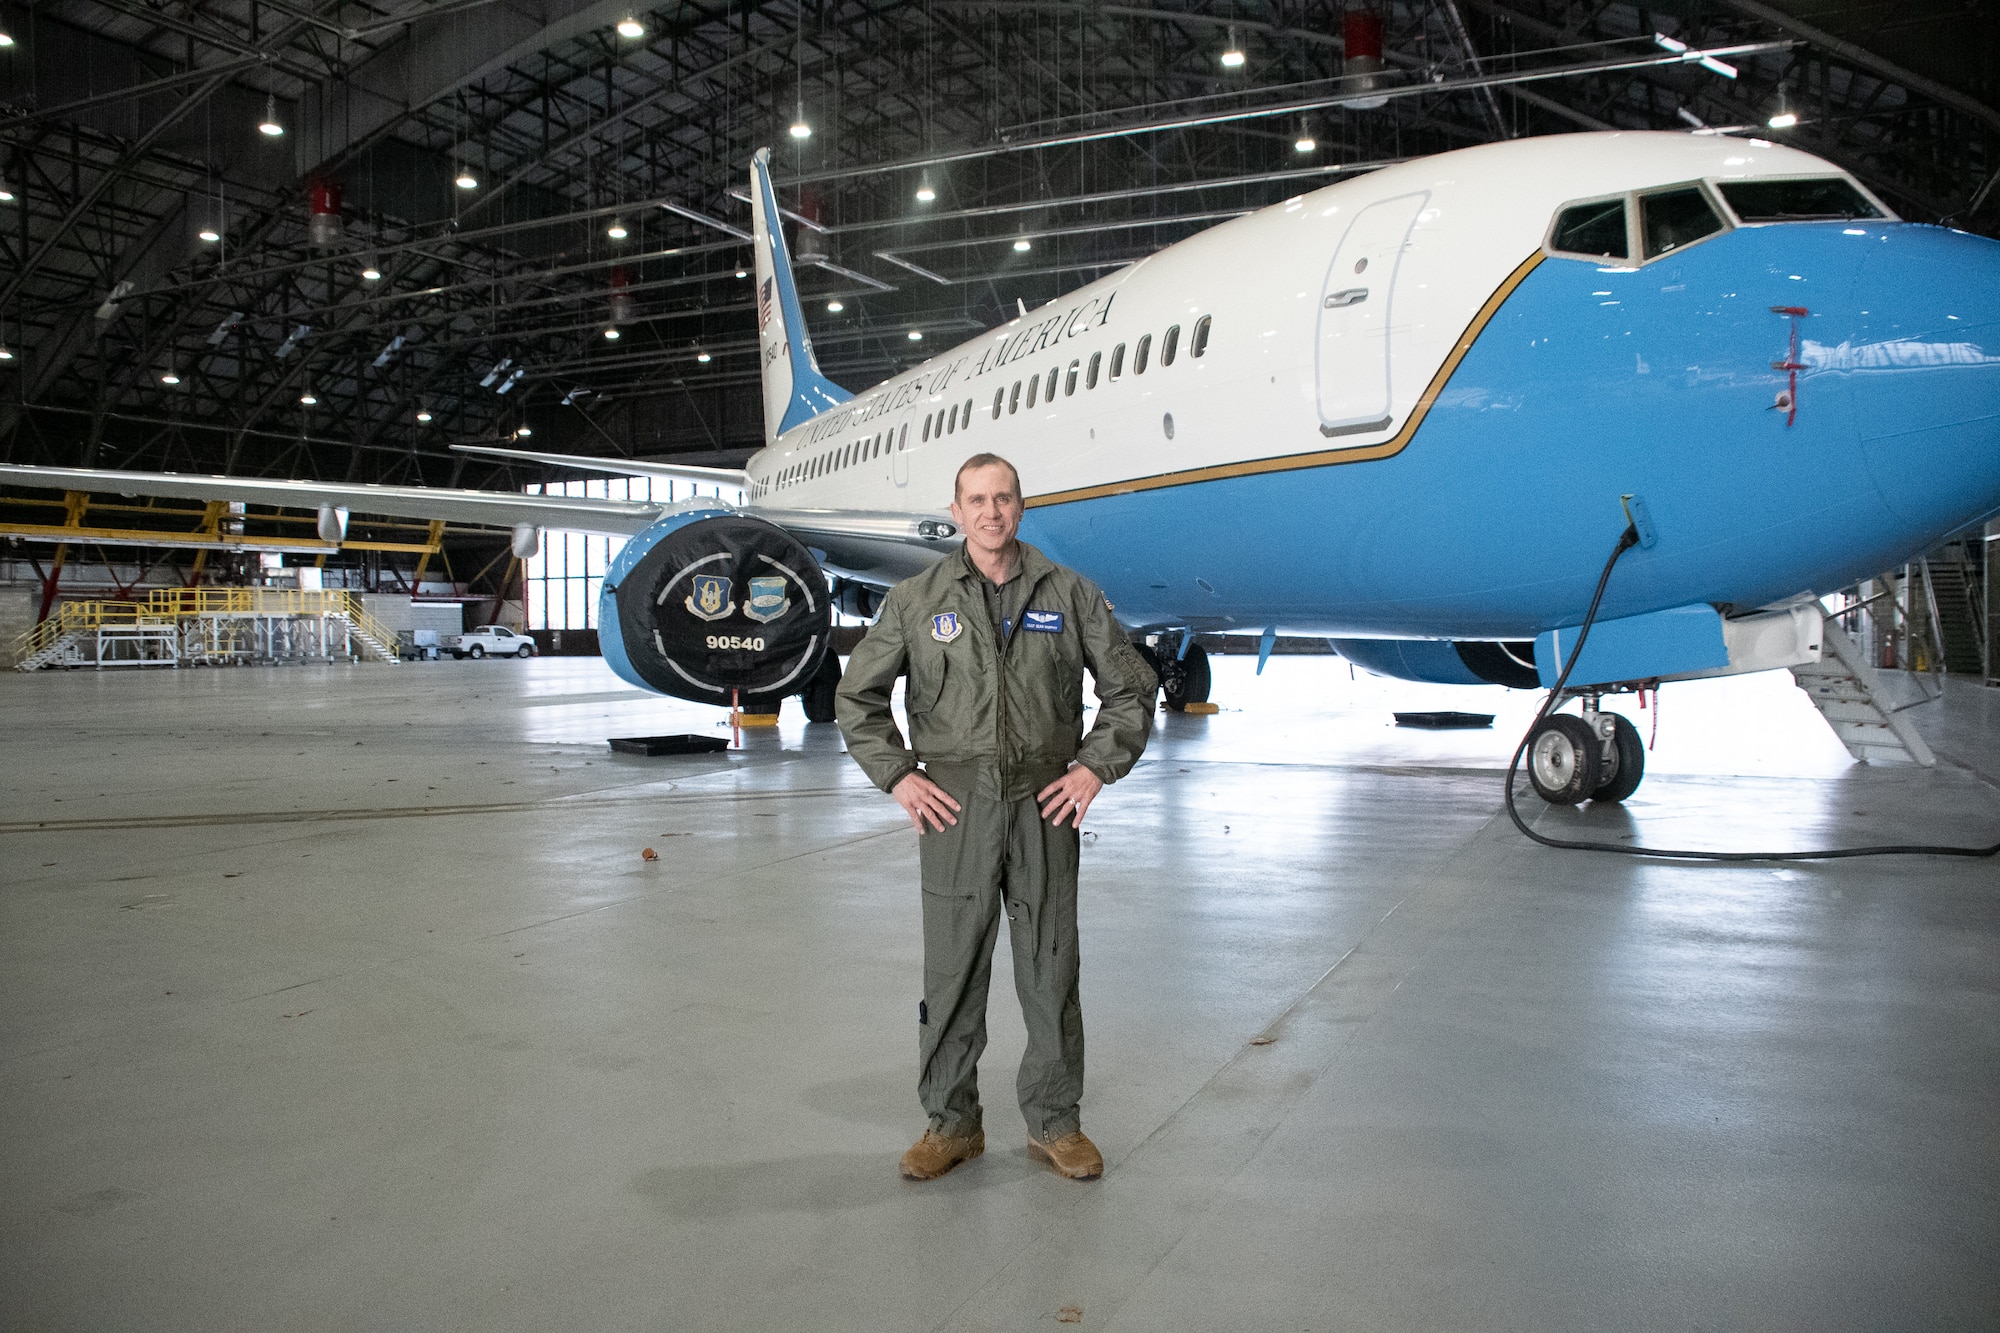 SSgt. Sean Murphy, 932nd Airlift Wing, flight attendant, poses for a photo, Scott Air Force Base, Ill., January 7, 2022. (U.S. Air Force Photo by Maj. Neil Samson)